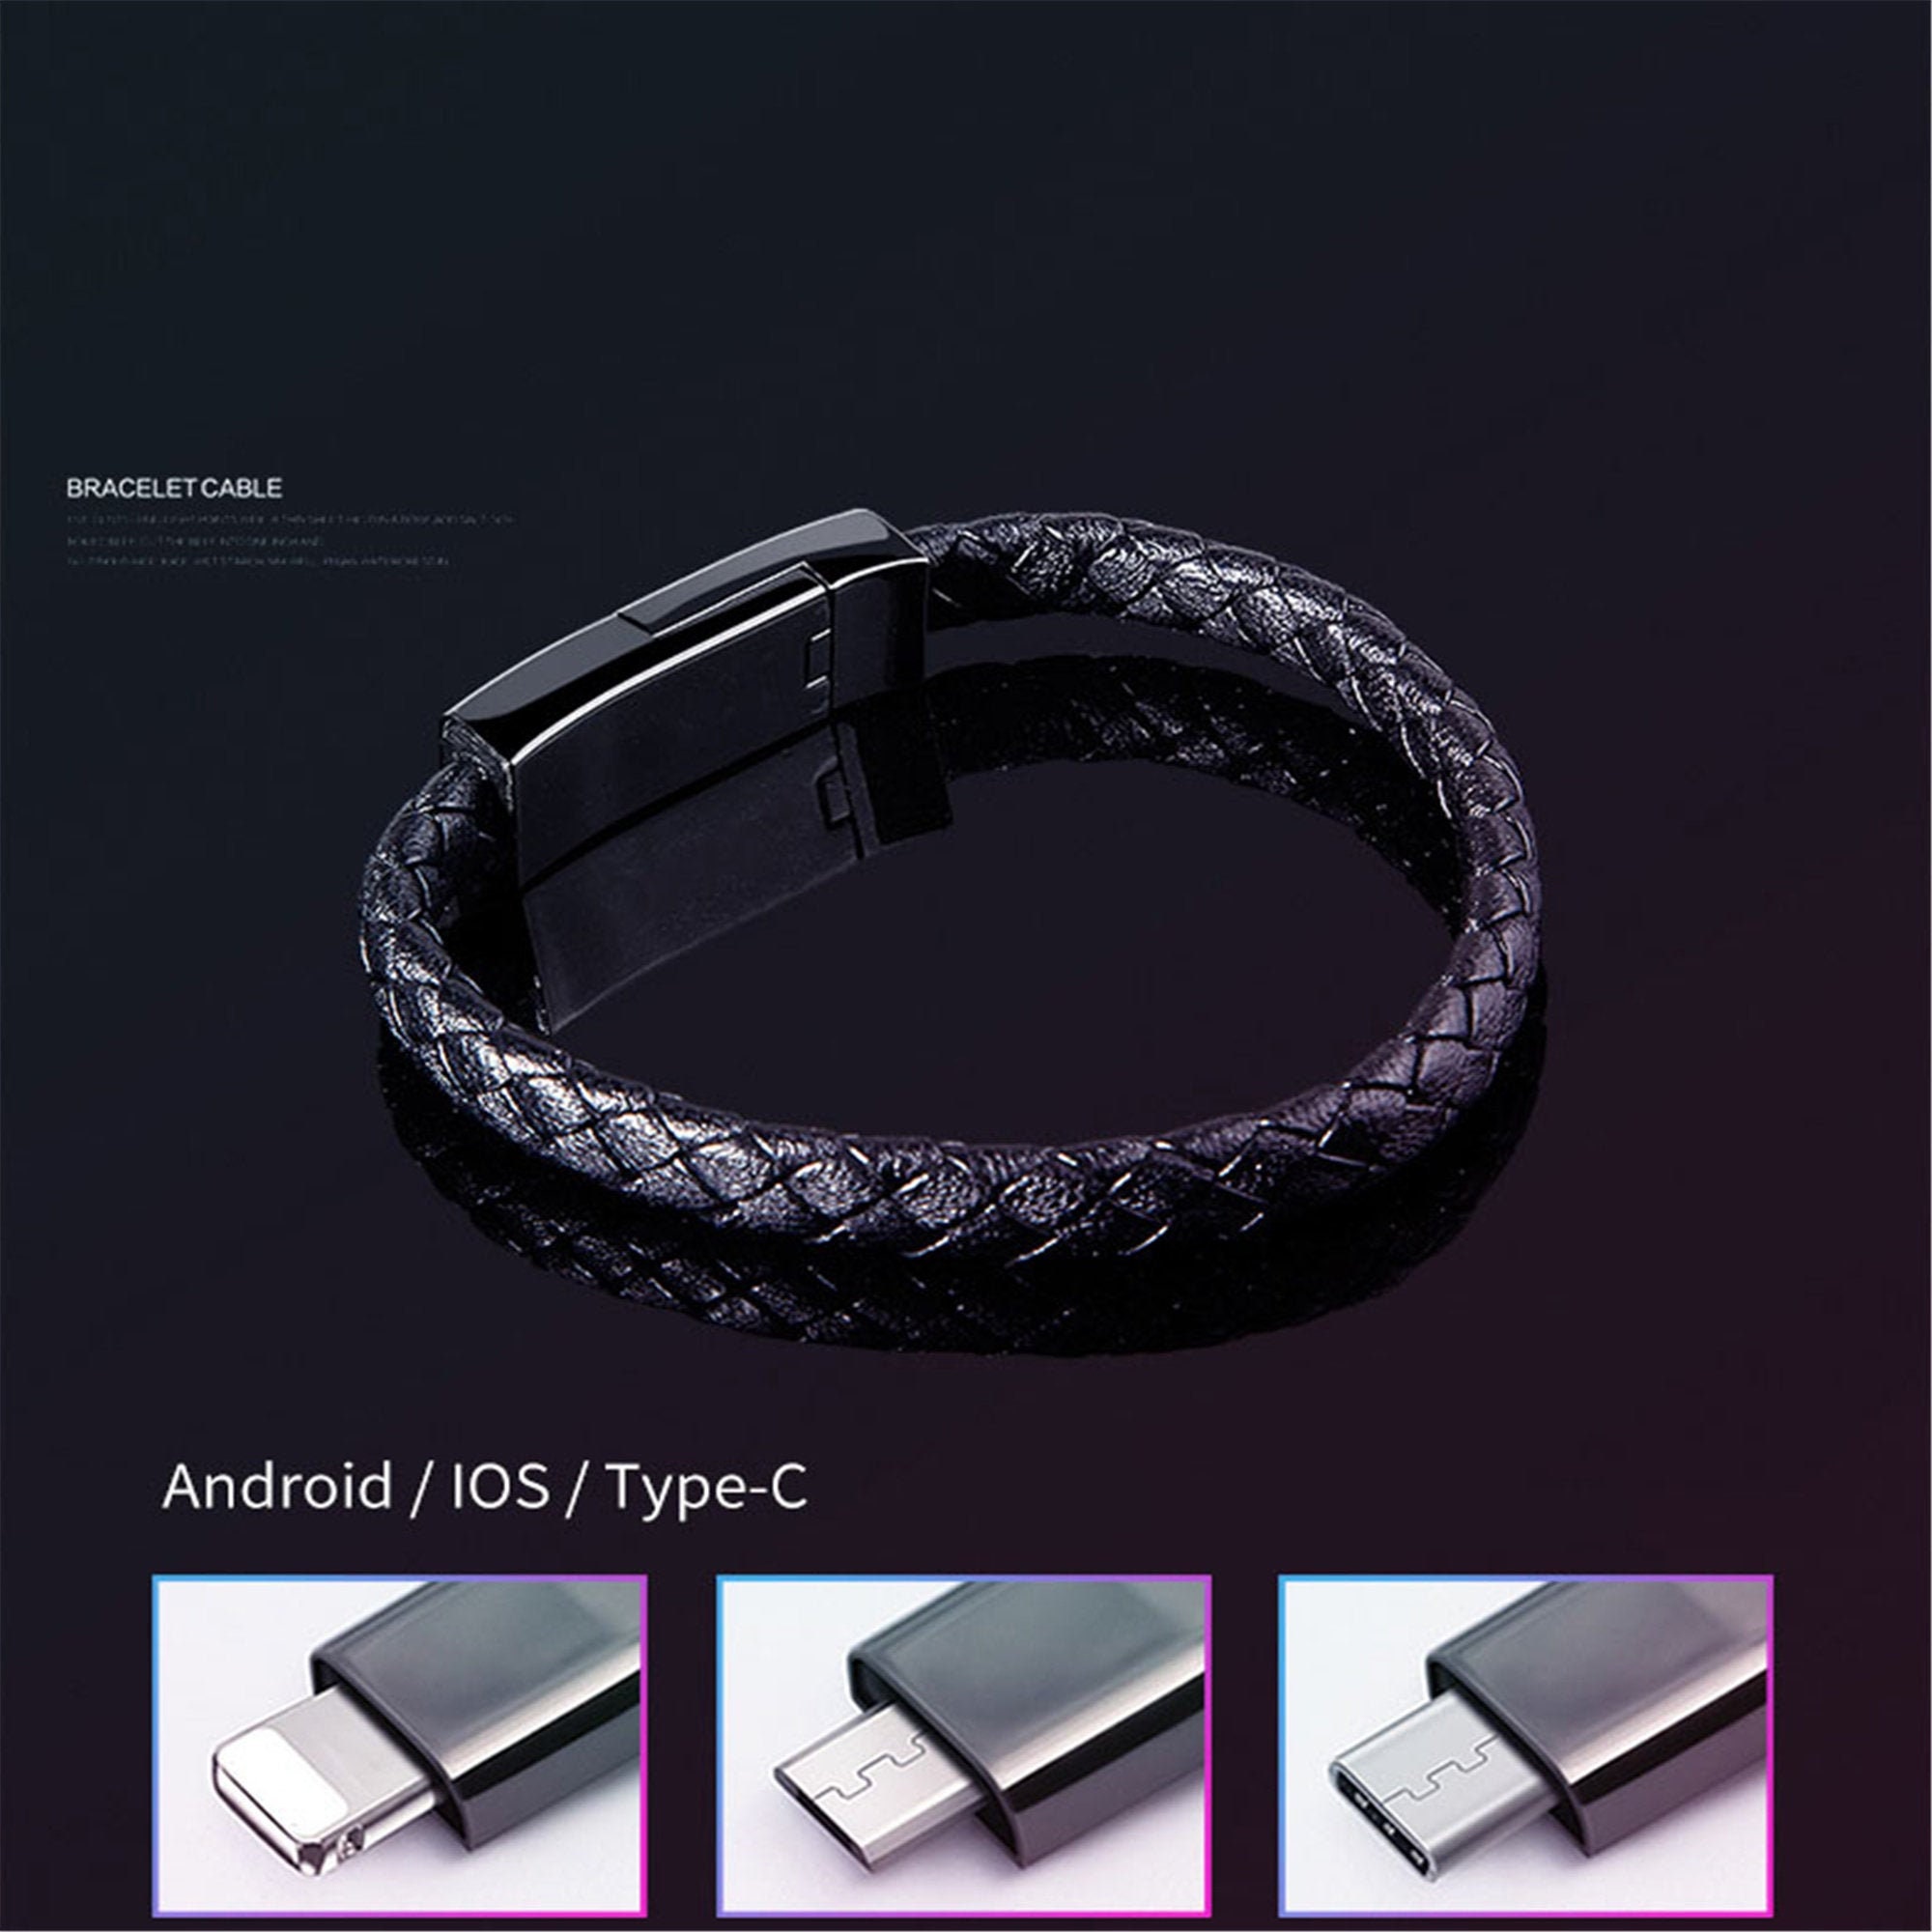 OFBK Bracelet USB Beeds Charging Data Cable for Phone Type C Androids Women  Bracelets - AliExpress